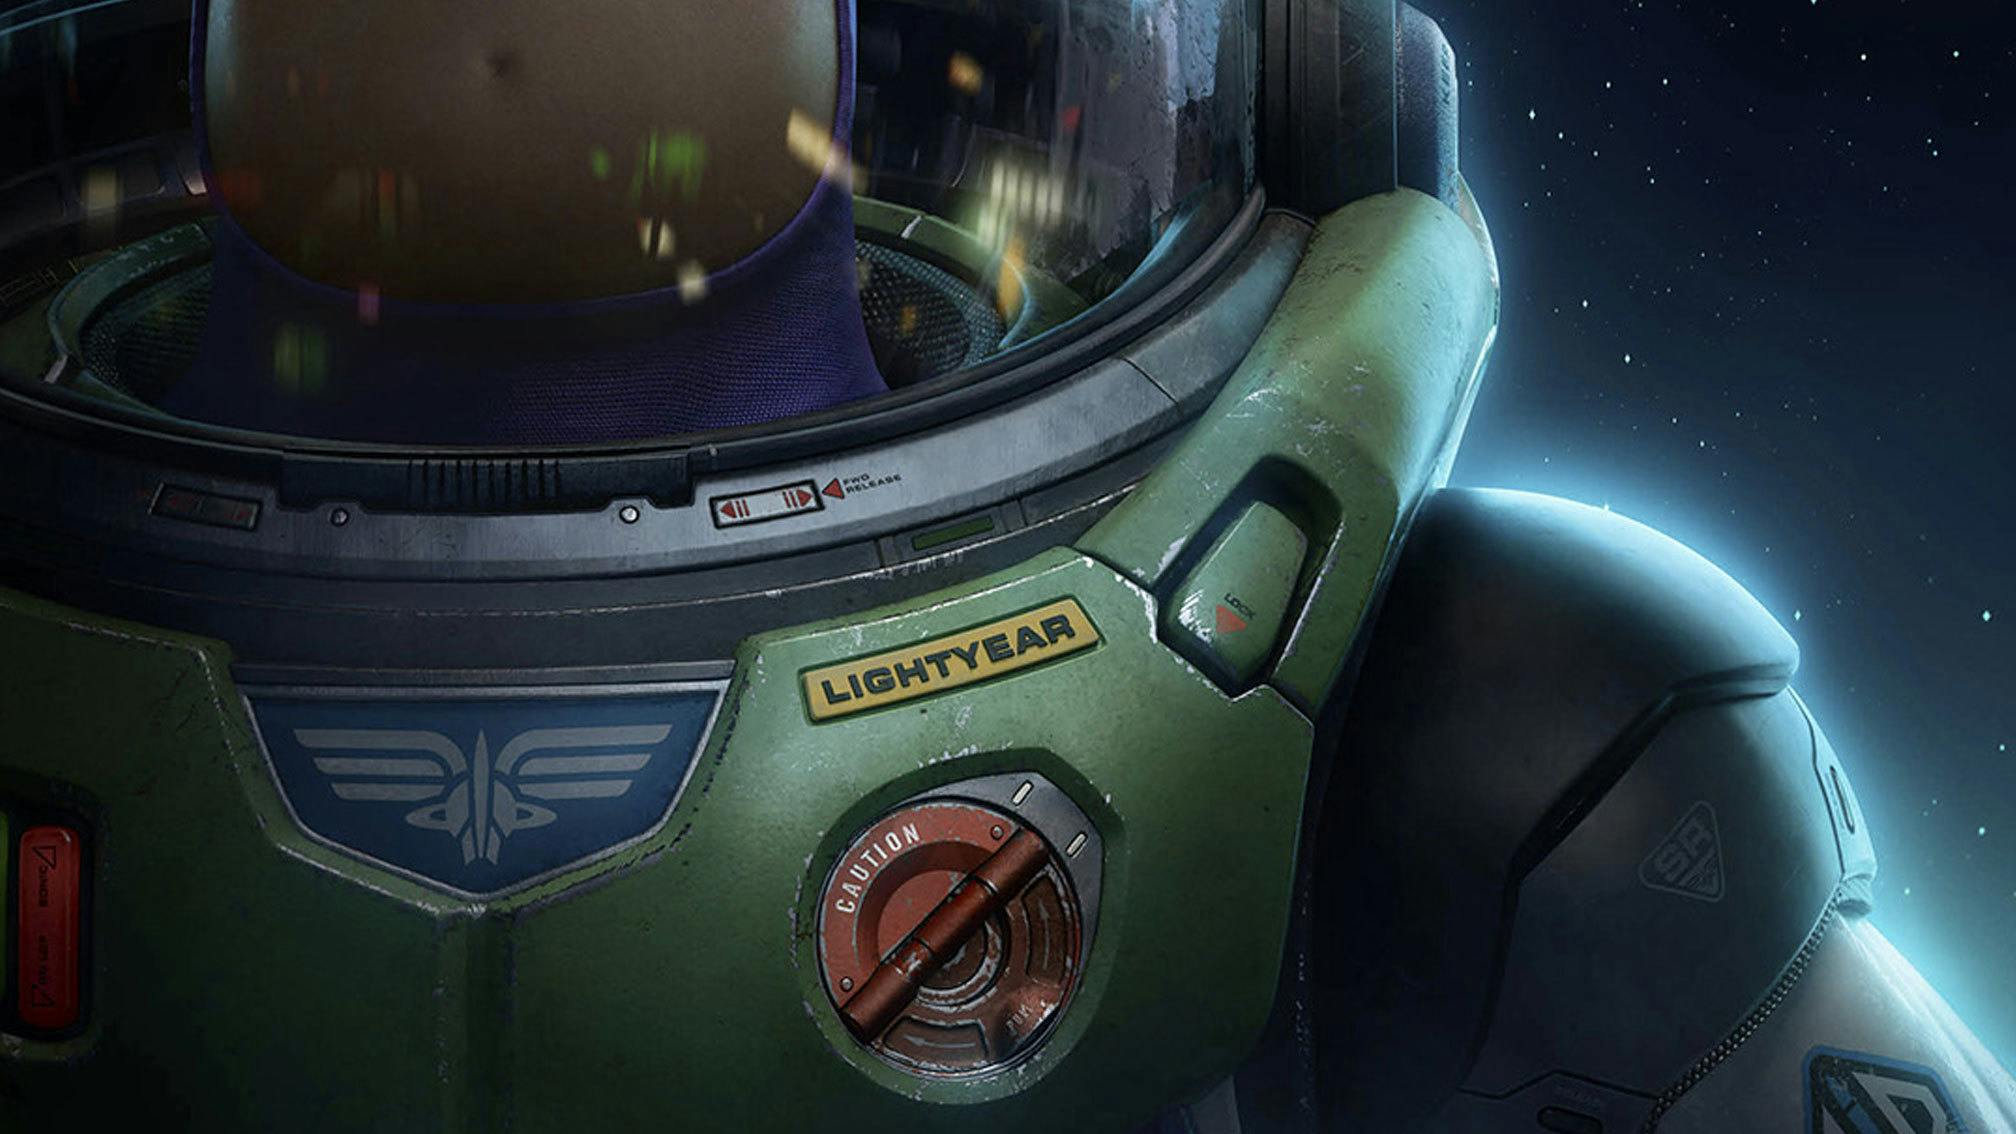 Watch the first teaser trailer for Disney and Pixar’s Lightyear, with Chris Evans voicing Buzz